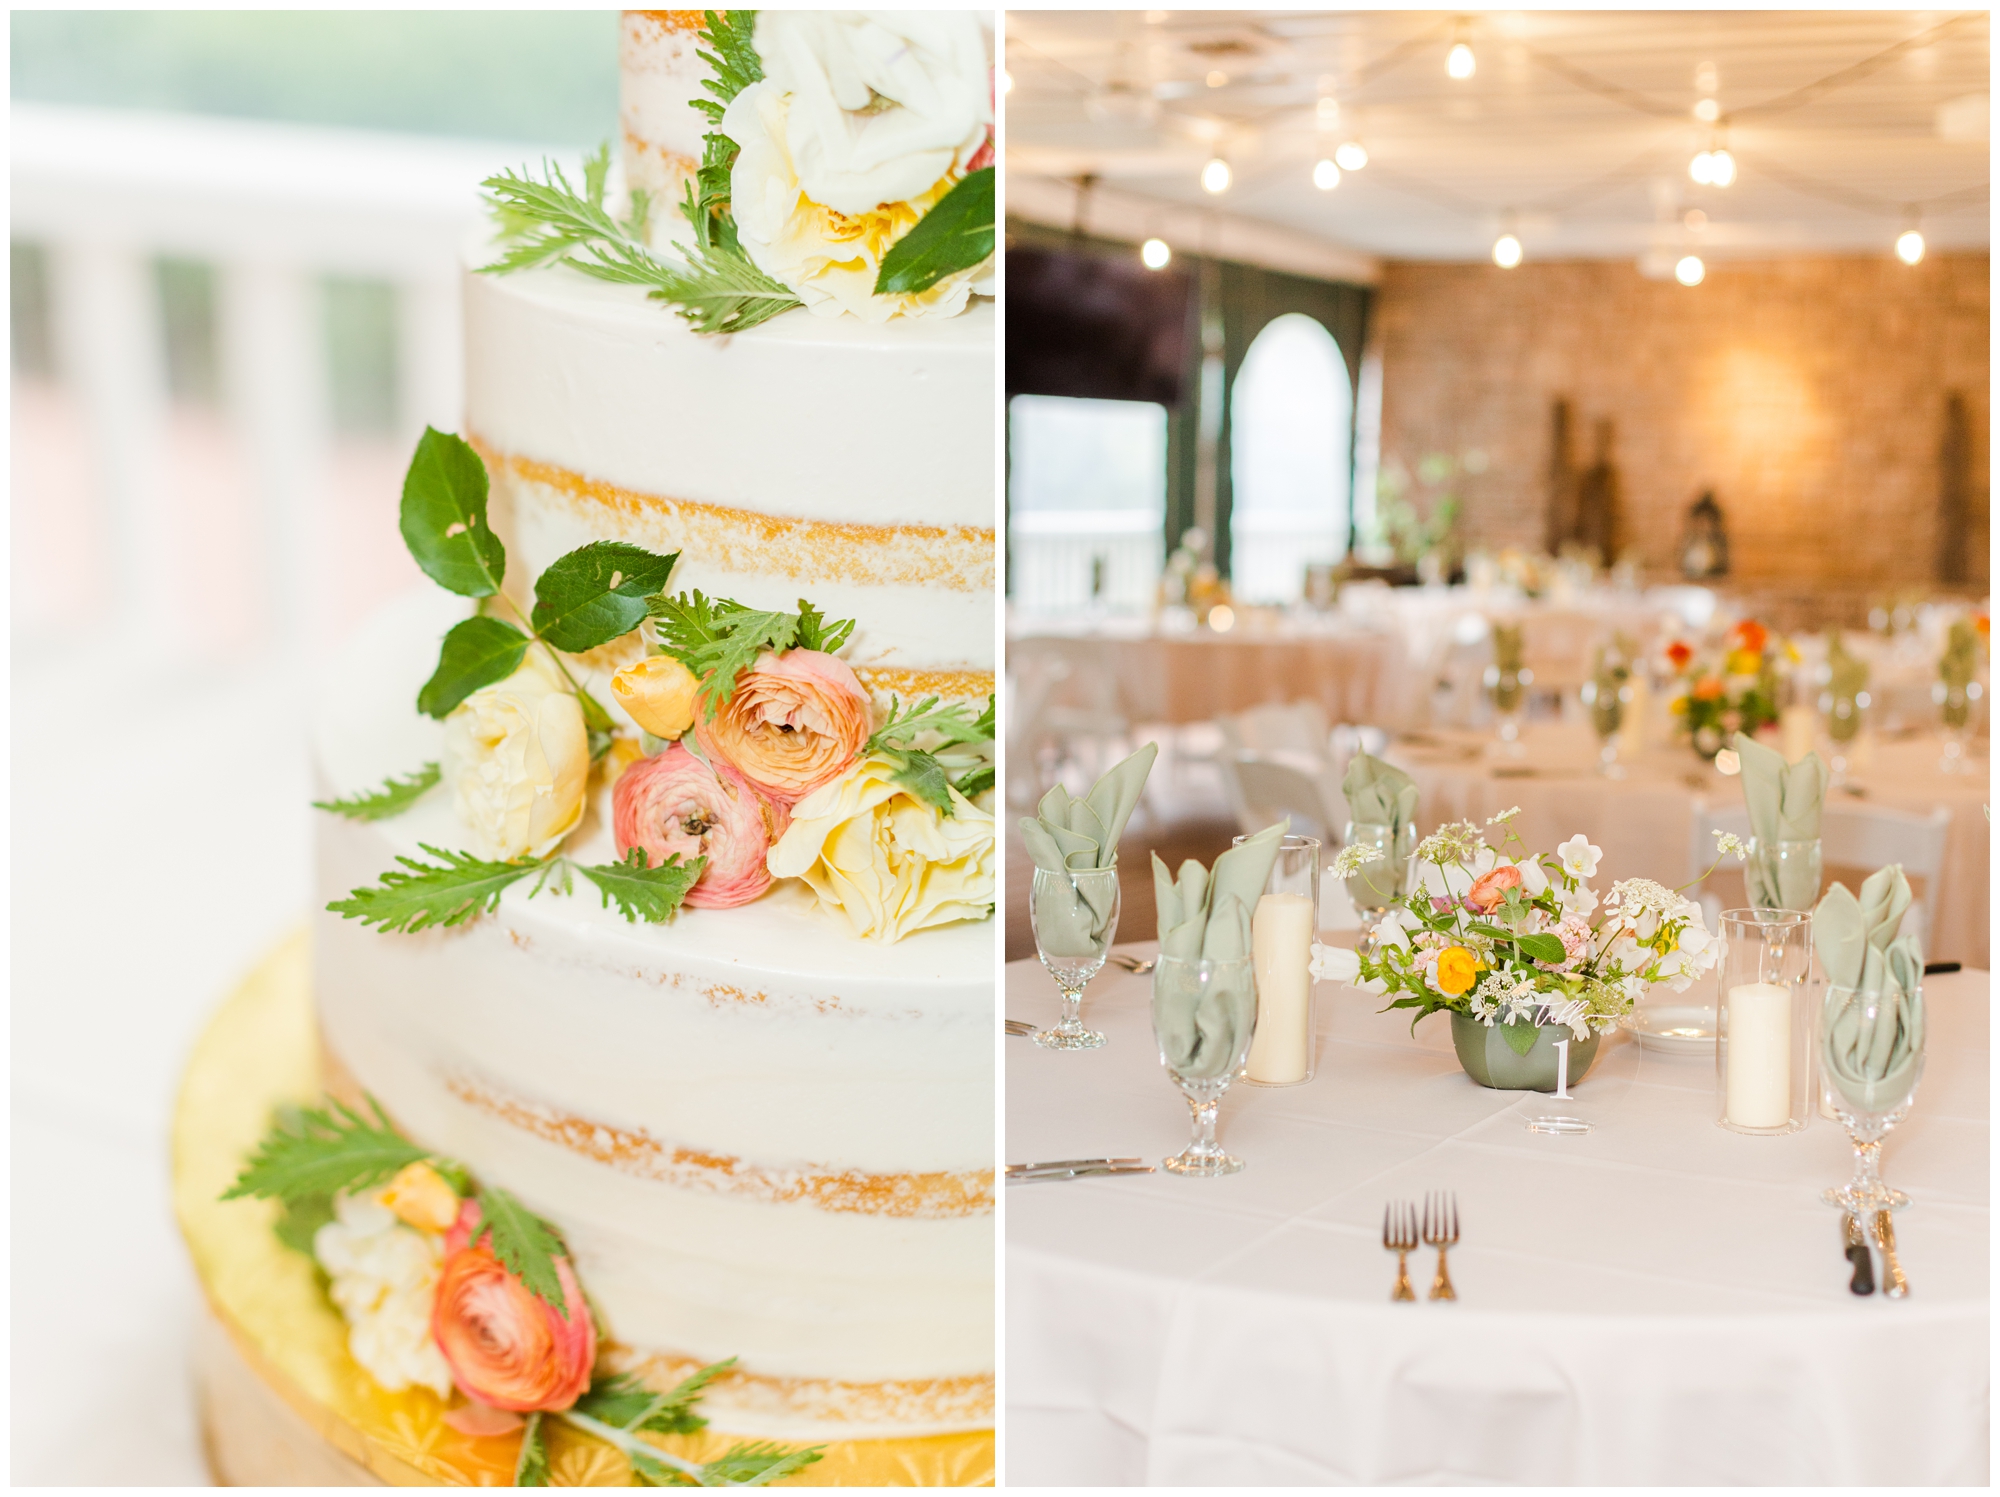 The wedding cake is in the first picture. In the second picture, The reception space is pictured. The tables are covered in a pale linen and are surrounded with white wooden chairs. There are short floral arrangements on the tables. 